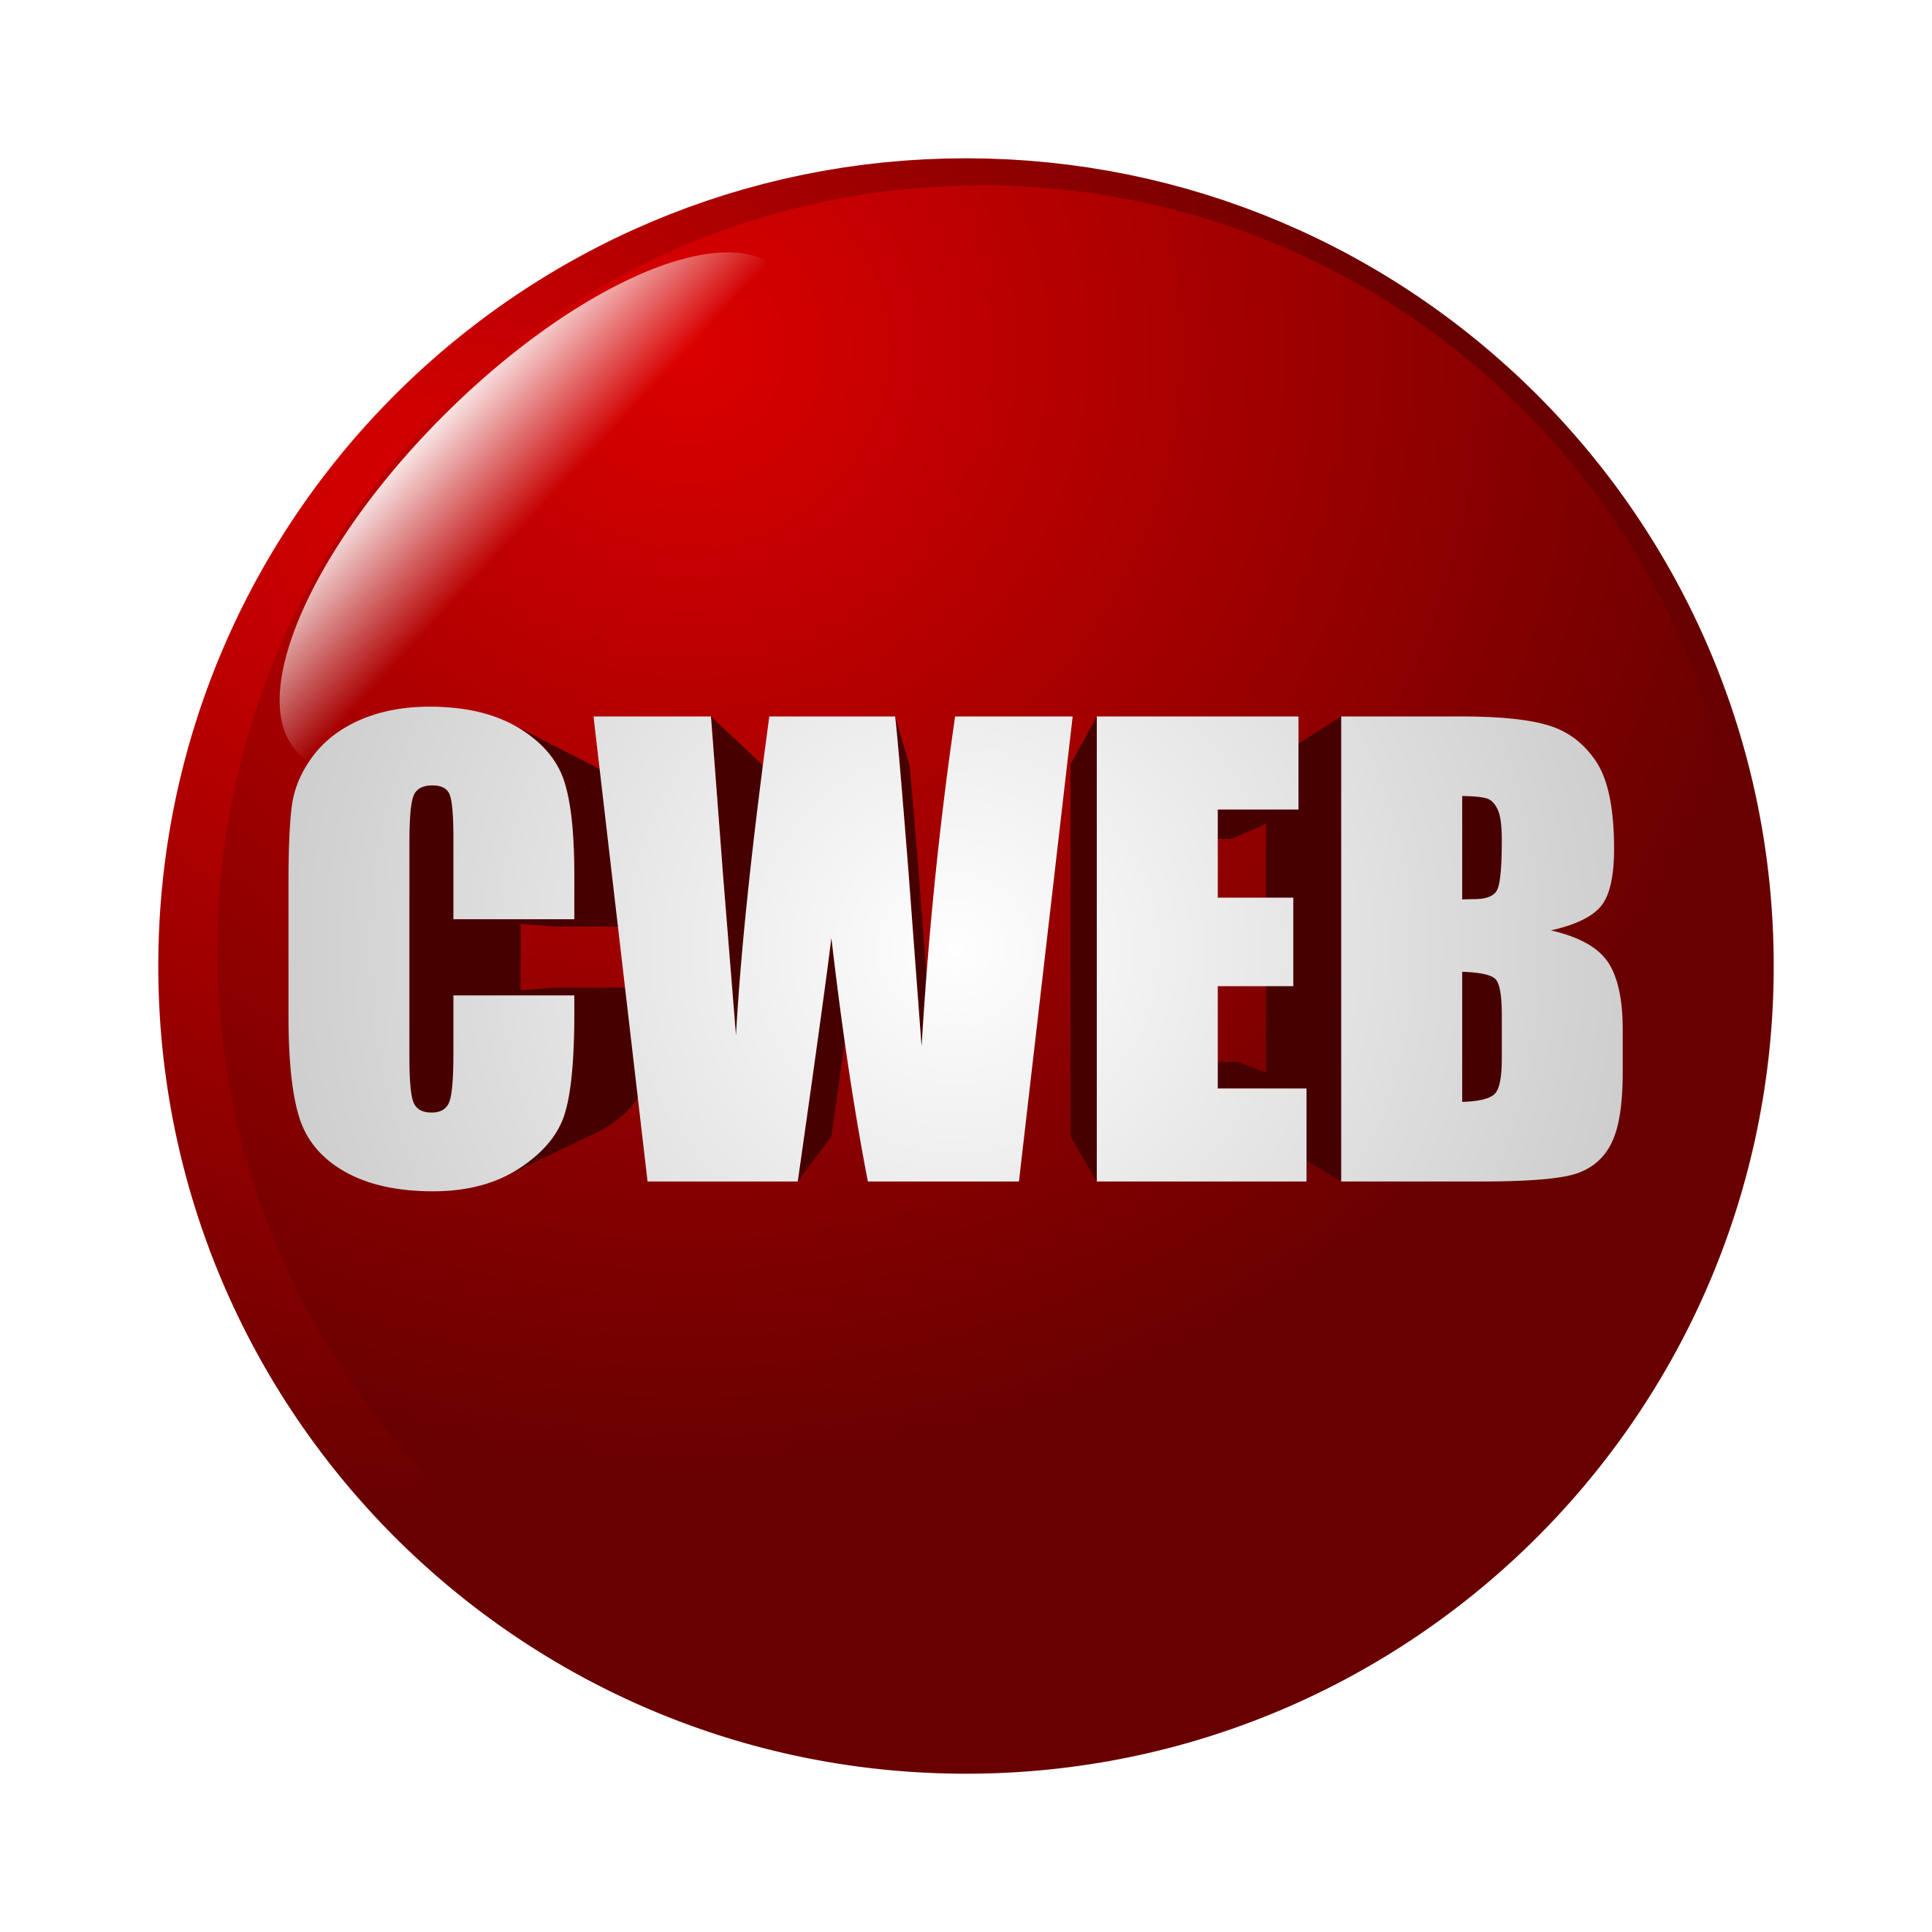 US News Company CWEB Unveils New Online Advertising Feature, Makes Global Reach Possible at Affordable Rates